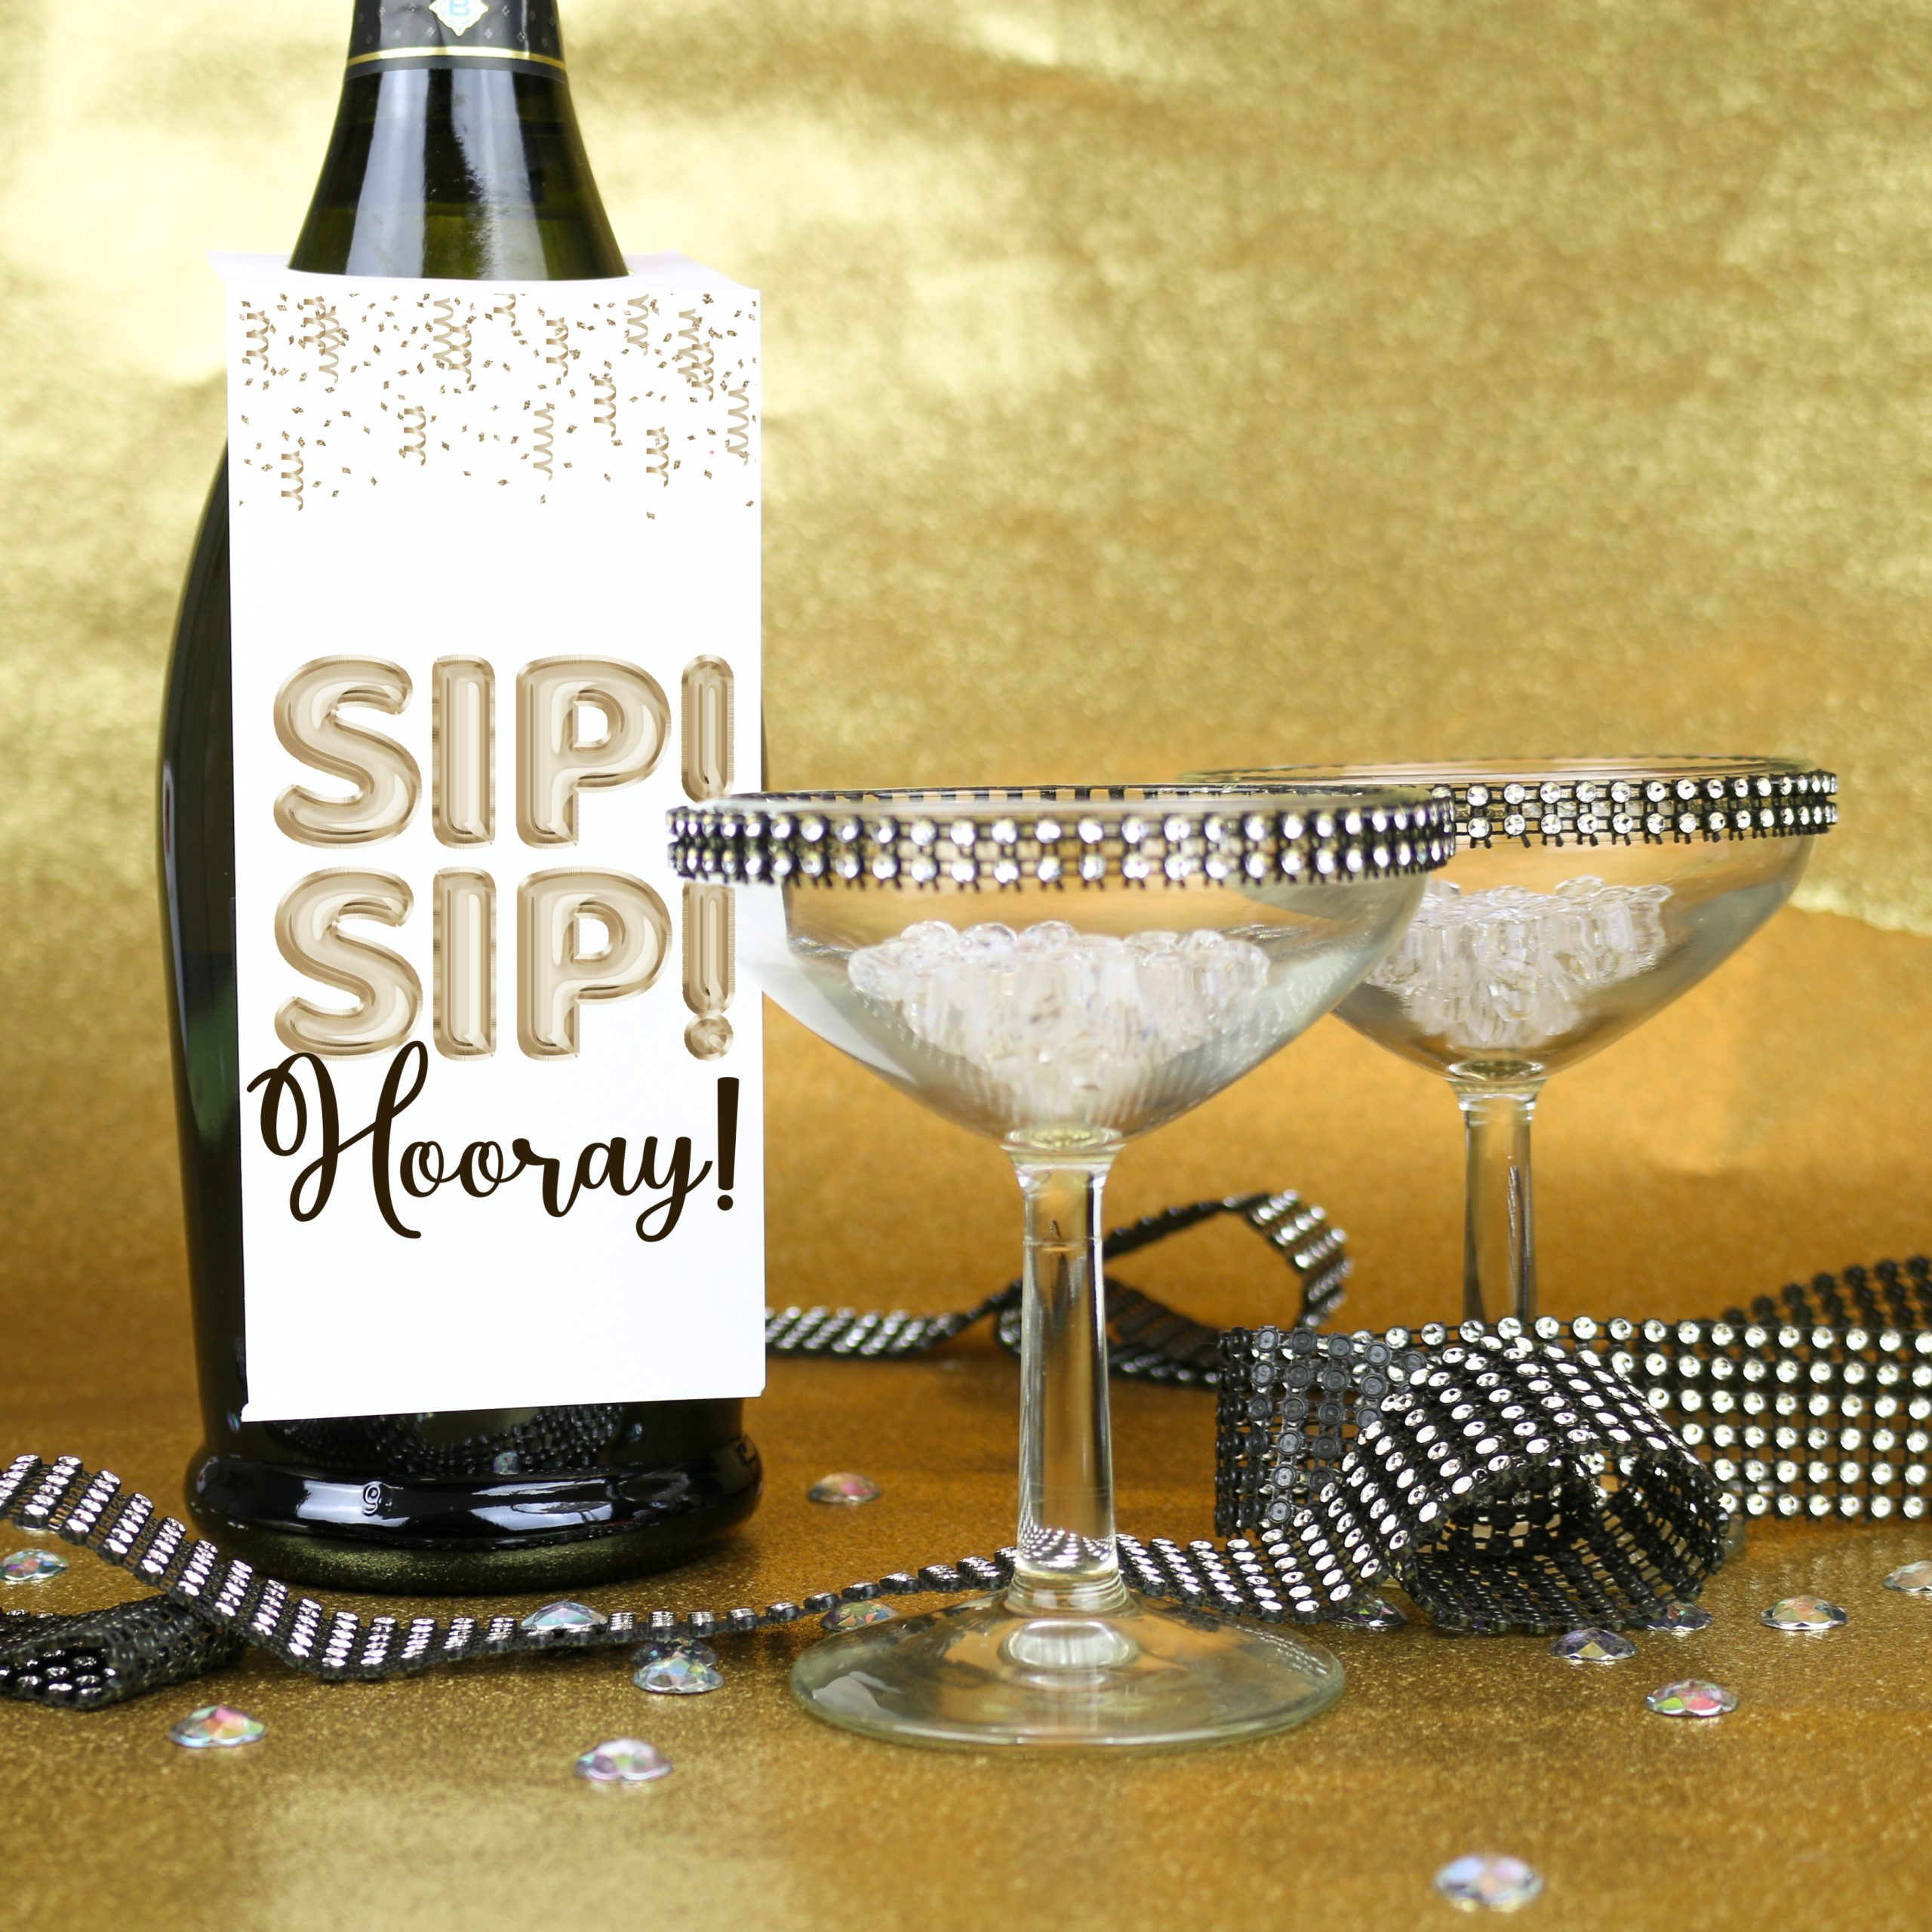 Champagne bottle with Sip! Sip! Hooray! bottle tag by champagne coupeson a gold background